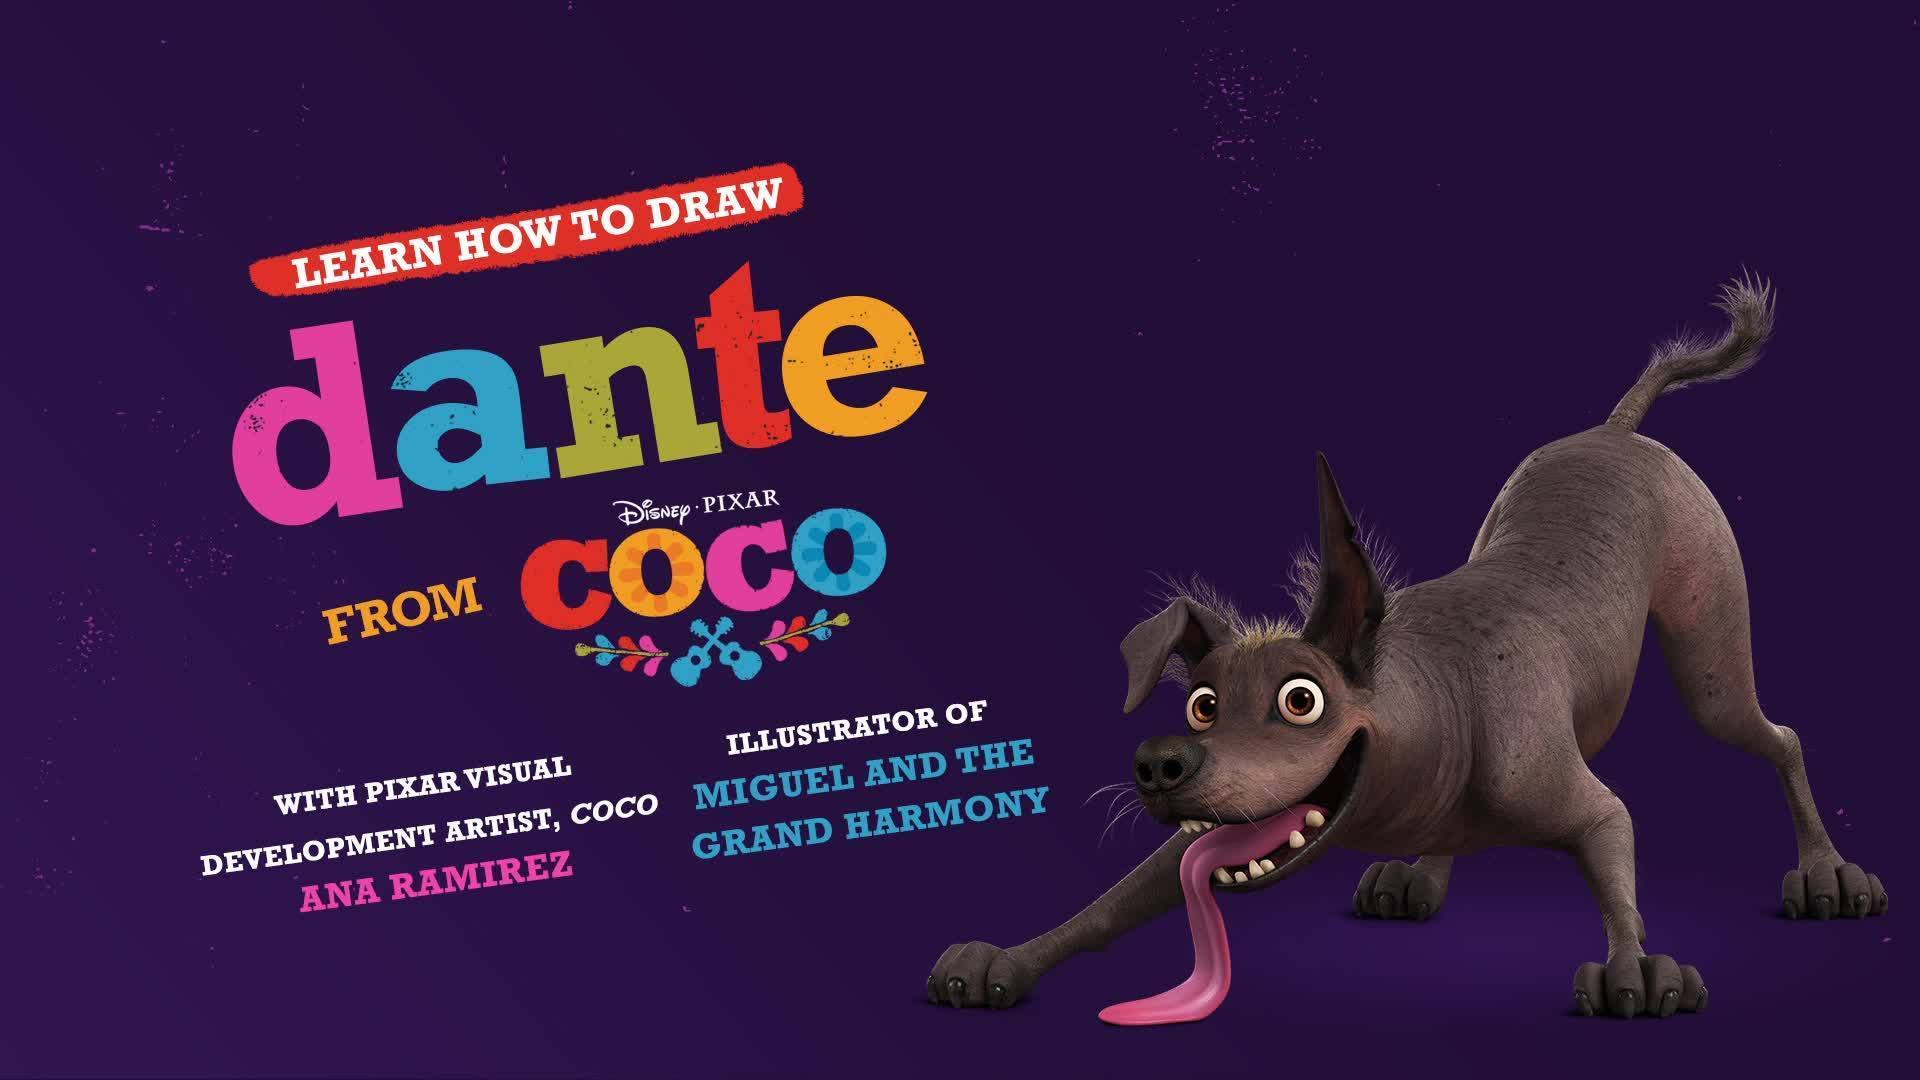 How To Draw Dante from Coco | Disney